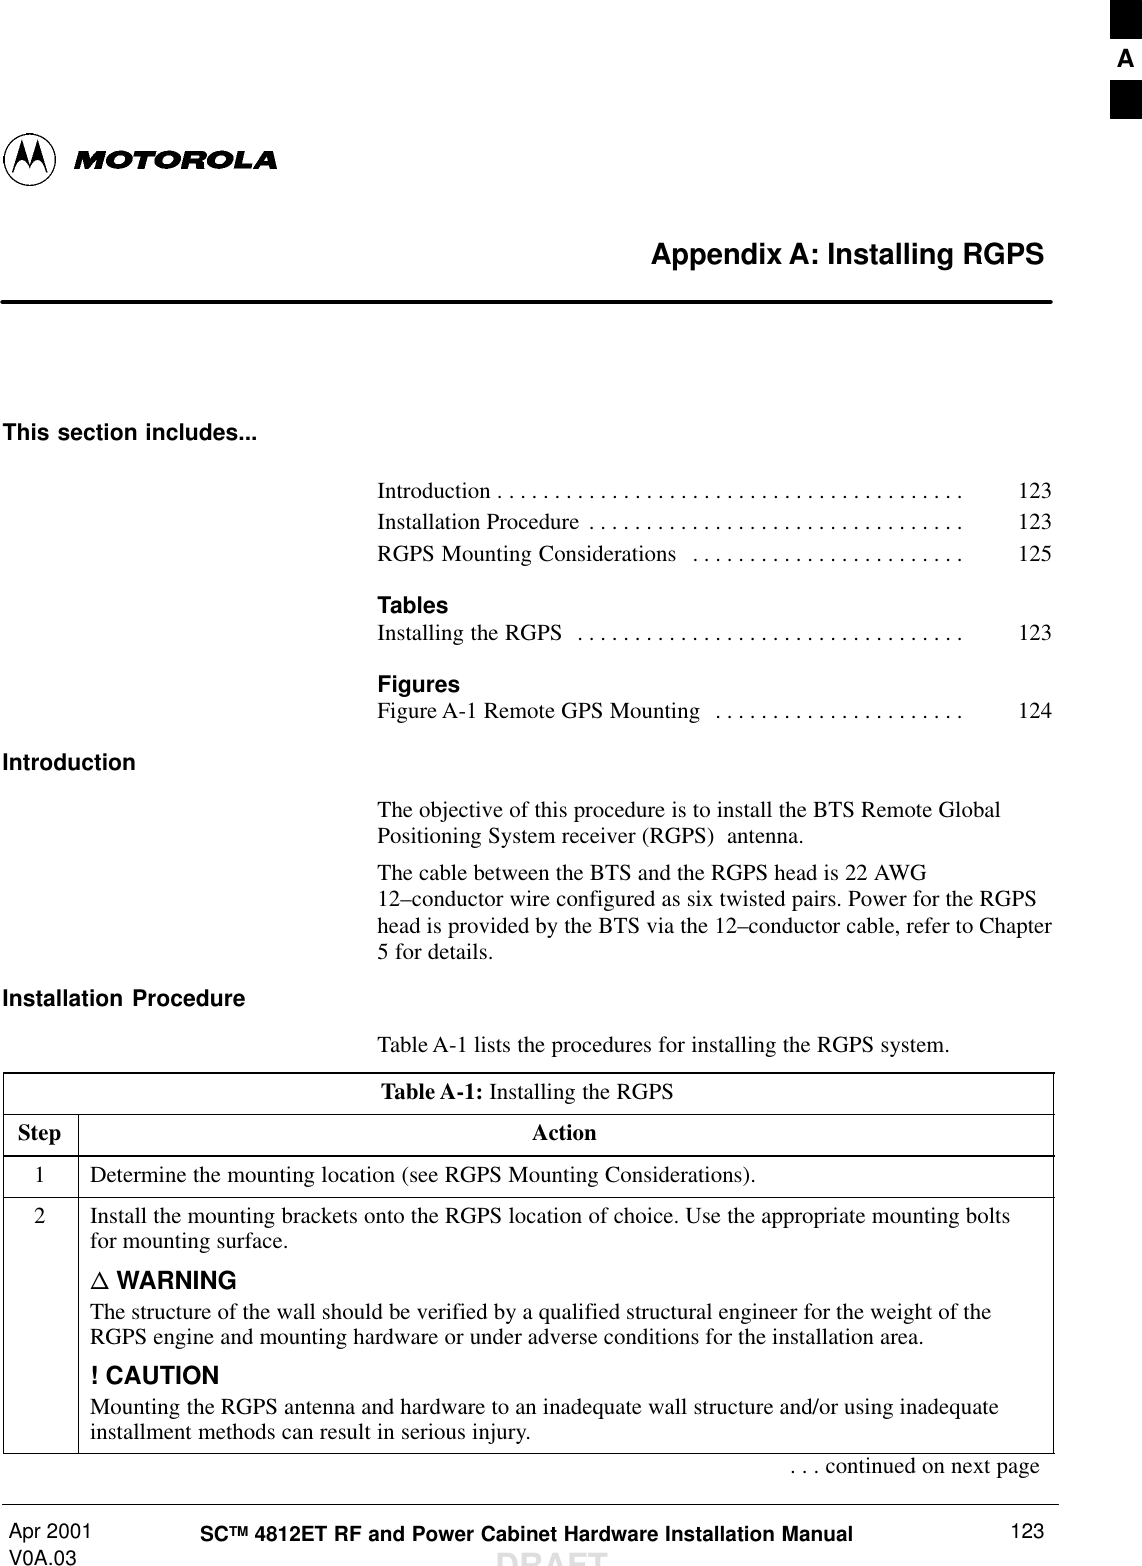 Apr 2001V0A.03 SCTM 4812ET RF and Power Cabinet Hardware Installation ManualDRAFT123Appendix A: Installing RGPSThis section includes...Introduction 123. . . . . . . . . . . . . . . . . . . . . . . . . . . . . . . . . . . . . . . . . Installation Procedure 123. . . . . . . . . . . . . . . . . . . . . . . . . . . . . . . . . RGPS Mounting Considerations 125. . . . . . . . . . . . . . . . . . . . . . . . TablesInstalling the RGPS 123. . . . . . . . . . . . . . . . . . . . . . . . . . . . . . . . . . FiguresFigure A-1 Remote GPS Mounting  124. . . . . . . . . . . . . . . . . . . . . . IntroductionThe objective of this procedure is to install the BTS Remote GlobalPositioning System receiver (RGPS)  antenna.The cable between the BTS and the RGPS head is 22 AWG12–conductor wire configured as six twisted pairs. Power for the RGPShead is provided by the BTS via the 12–conductor cable, refer to Chapter5 for details.Installation ProcedureTable A-1 lists the procedures for installing the RGPS system.Table A-1: Installing the RGPSStep Action1Determine the mounting location (see RGPS Mounting Considerations).2Install the mounting brackets onto the RGPS location of choice. Use the appropriate mounting boltsfor mounting surface.n WARNINGThe structure of the wall should be verified by a qualified structural engineer for the weight of theRGPS engine and mounting hardware or under adverse conditions for the installation area.! CAUTIONMounting the RGPS antenna and hardware to an inadequate wall structure and/or using inadequateinstallment methods can result in serious injury.. . . continued on next pageA